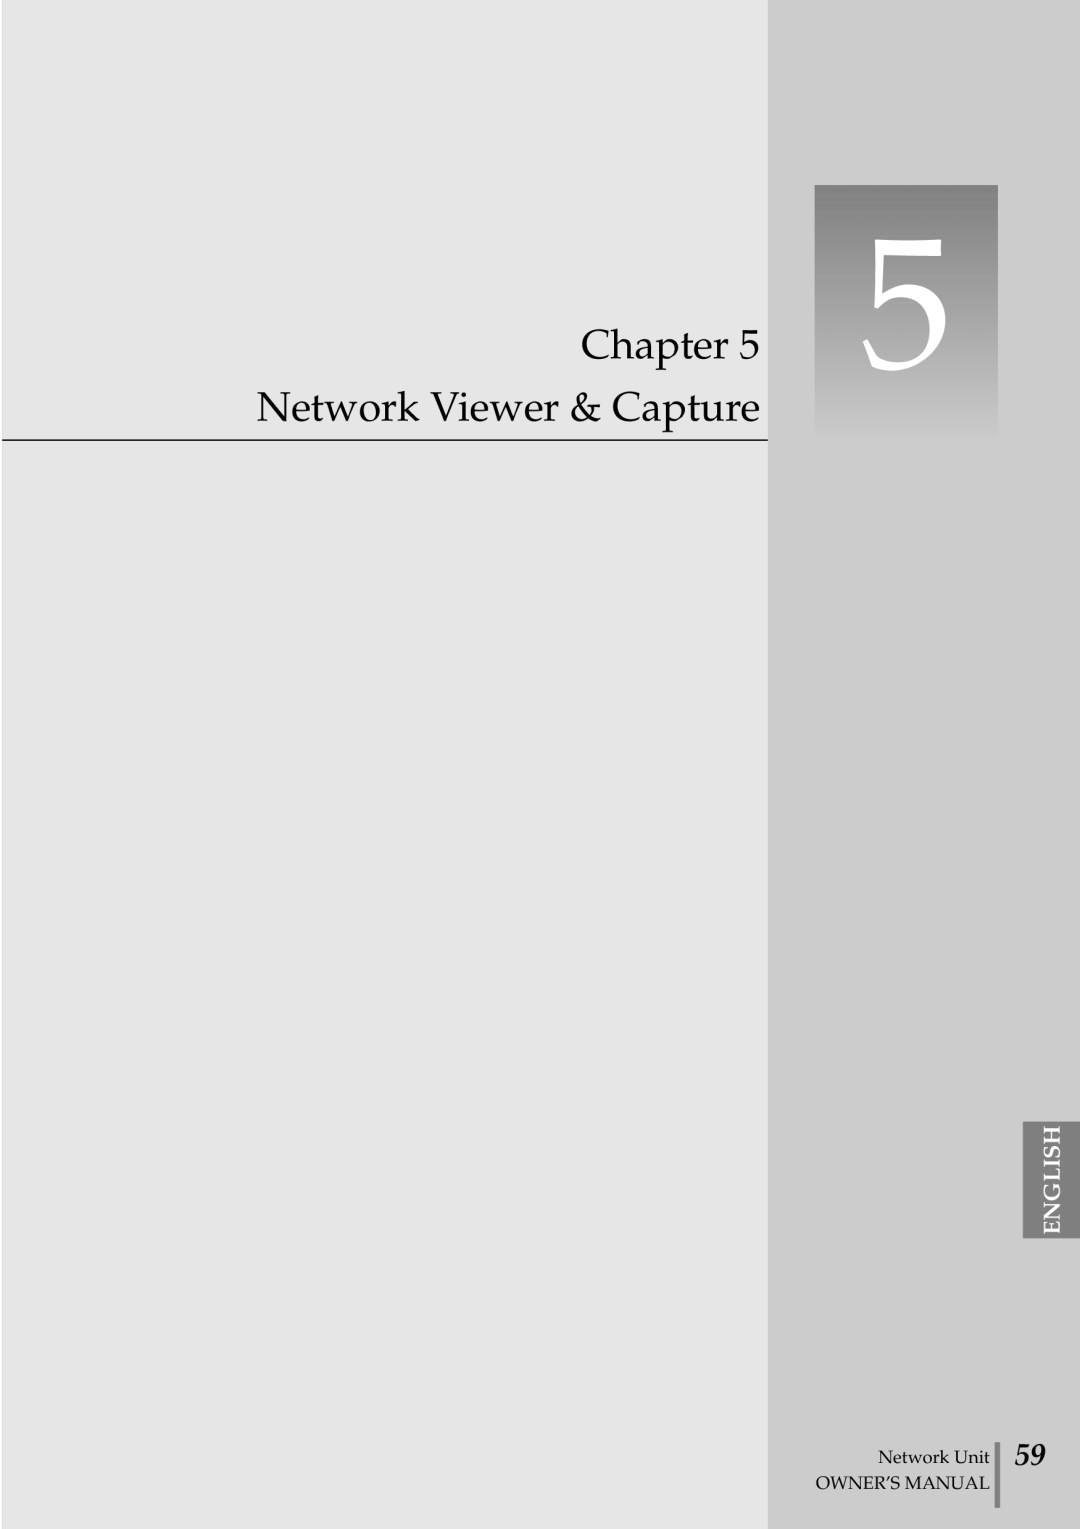 Sanyo POA-PN02 owner manual Network Viewer & Capture, Chapter, English, Network Unit OWNER’S MANUAL 